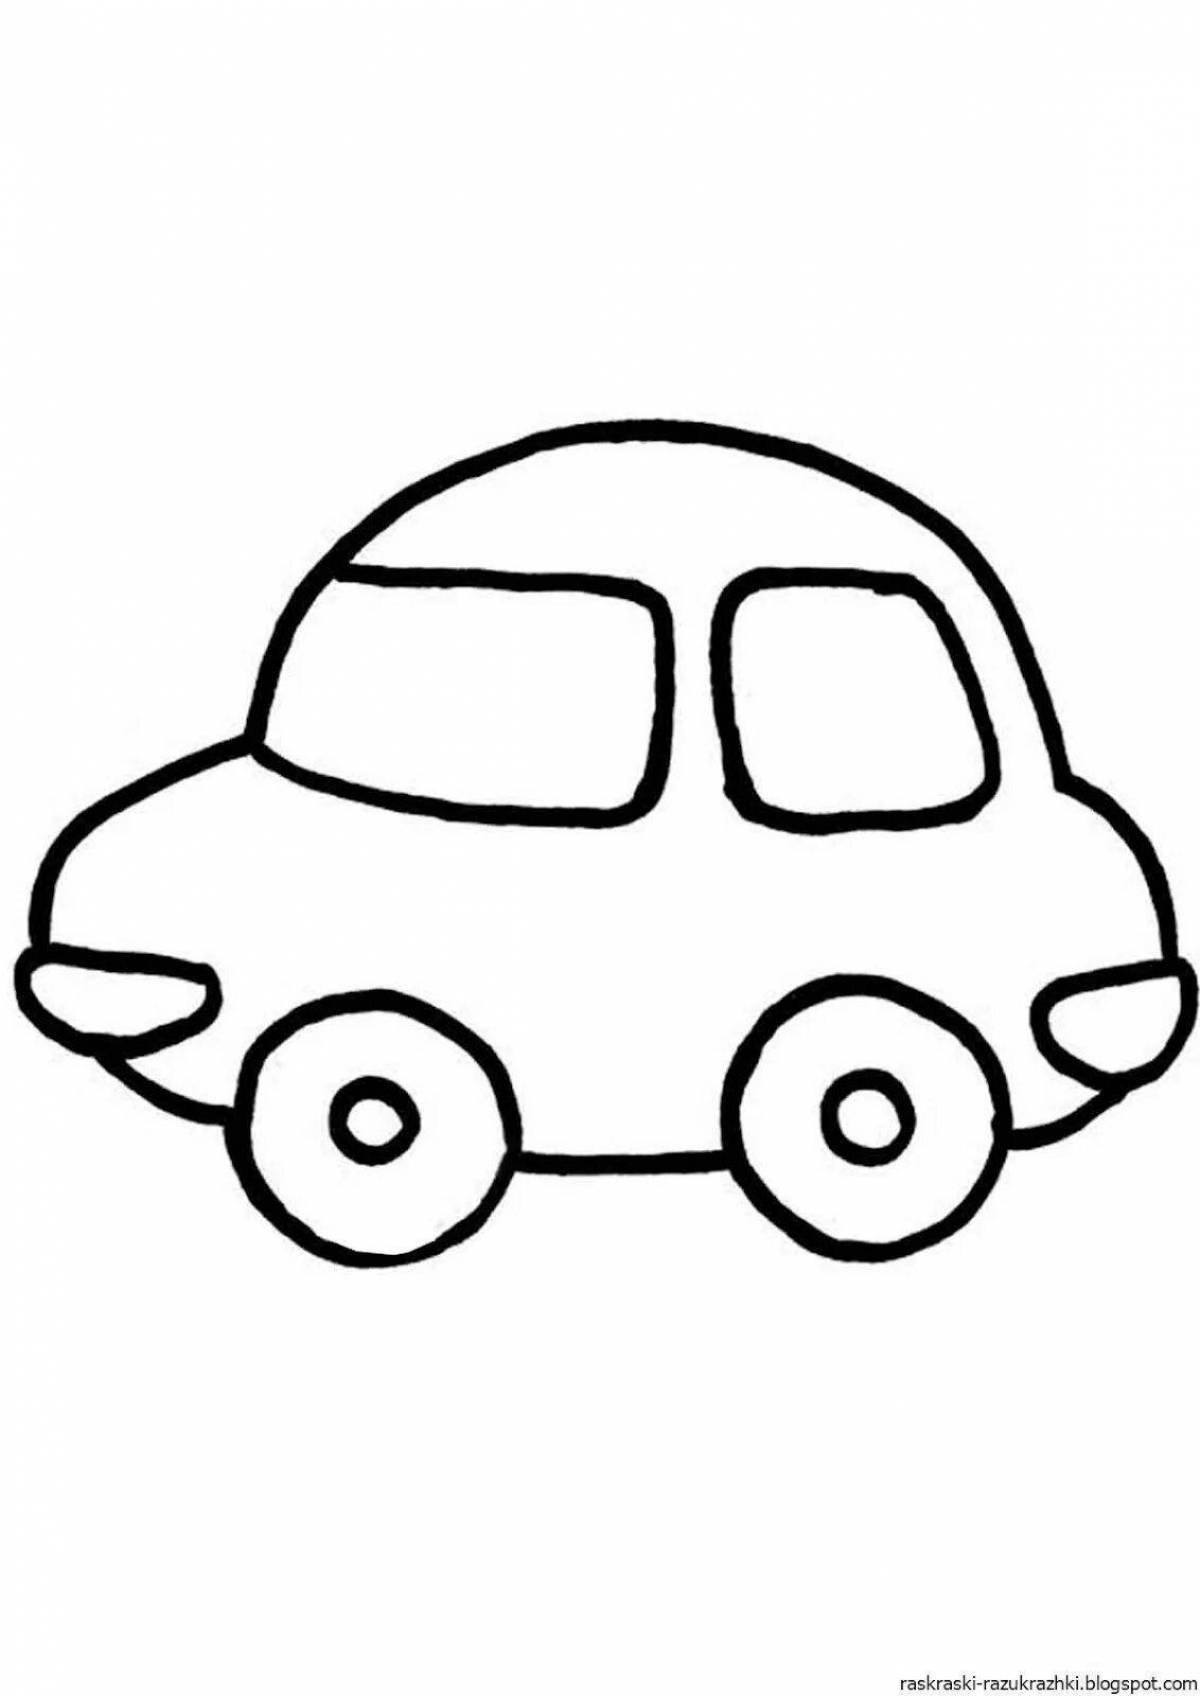 Incredible cars coloring book for 2-3 year olds